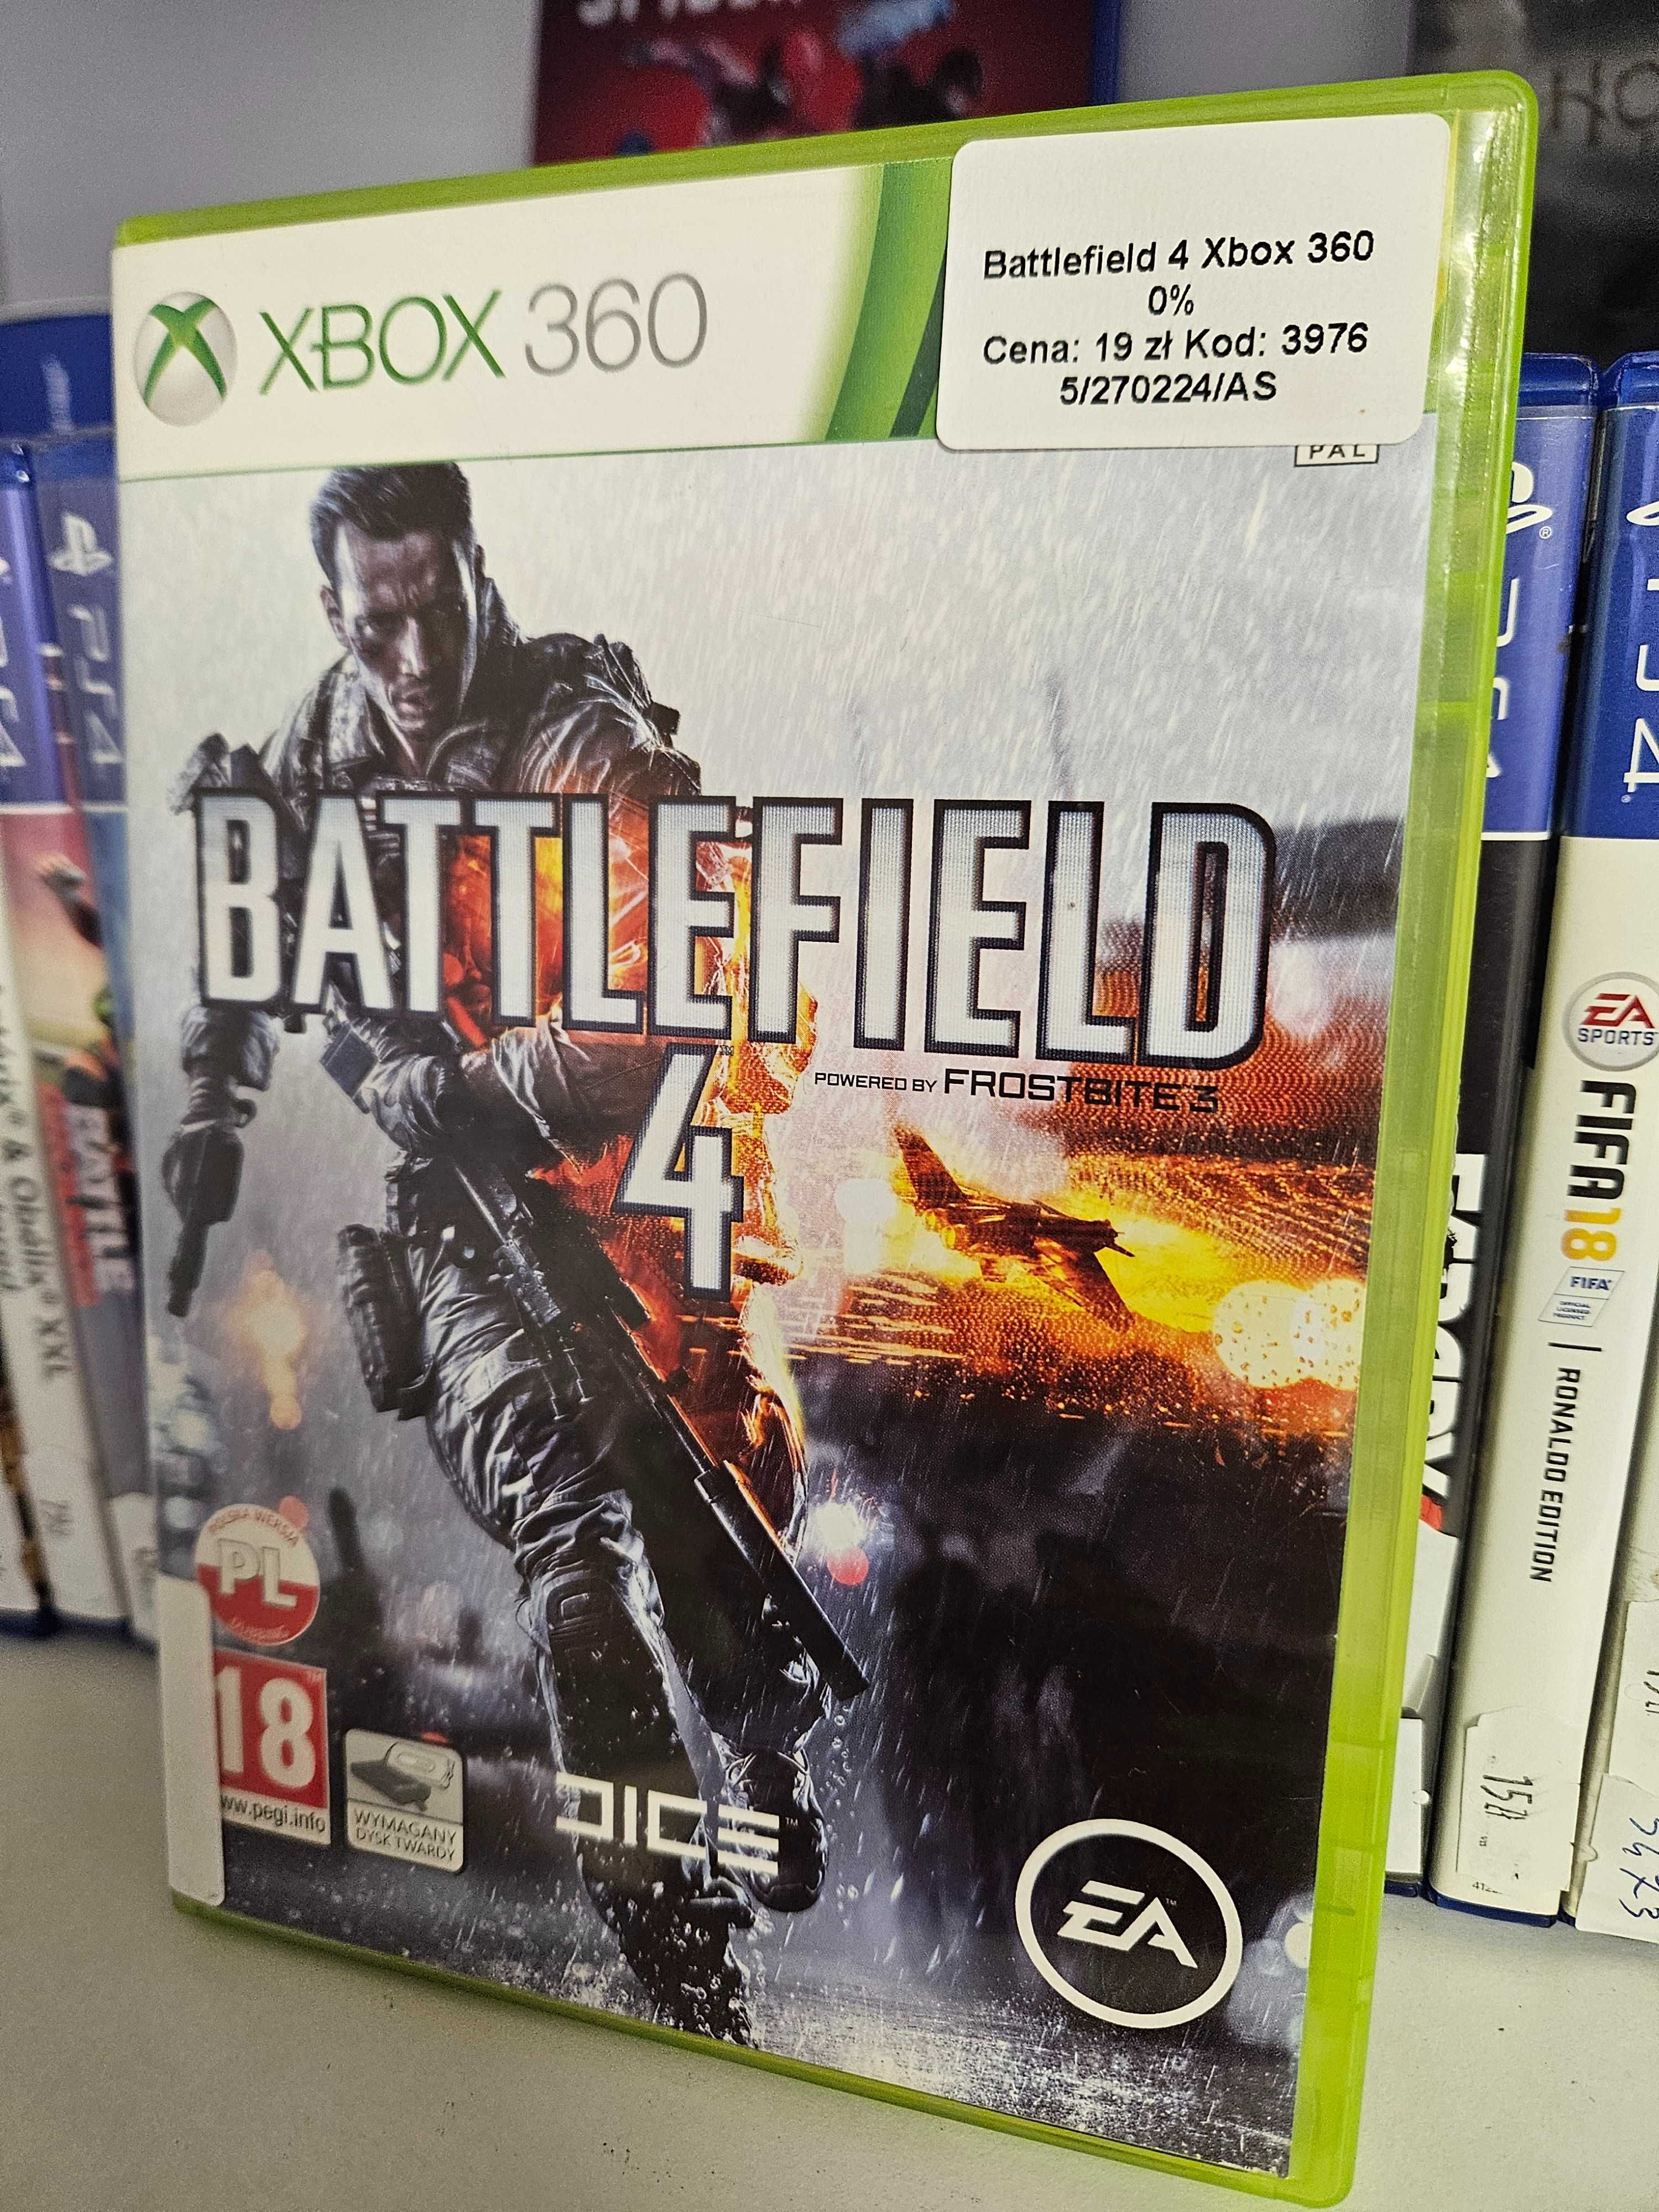 Battlefield 4 Xbox 360 - As Game & GSM - 3976